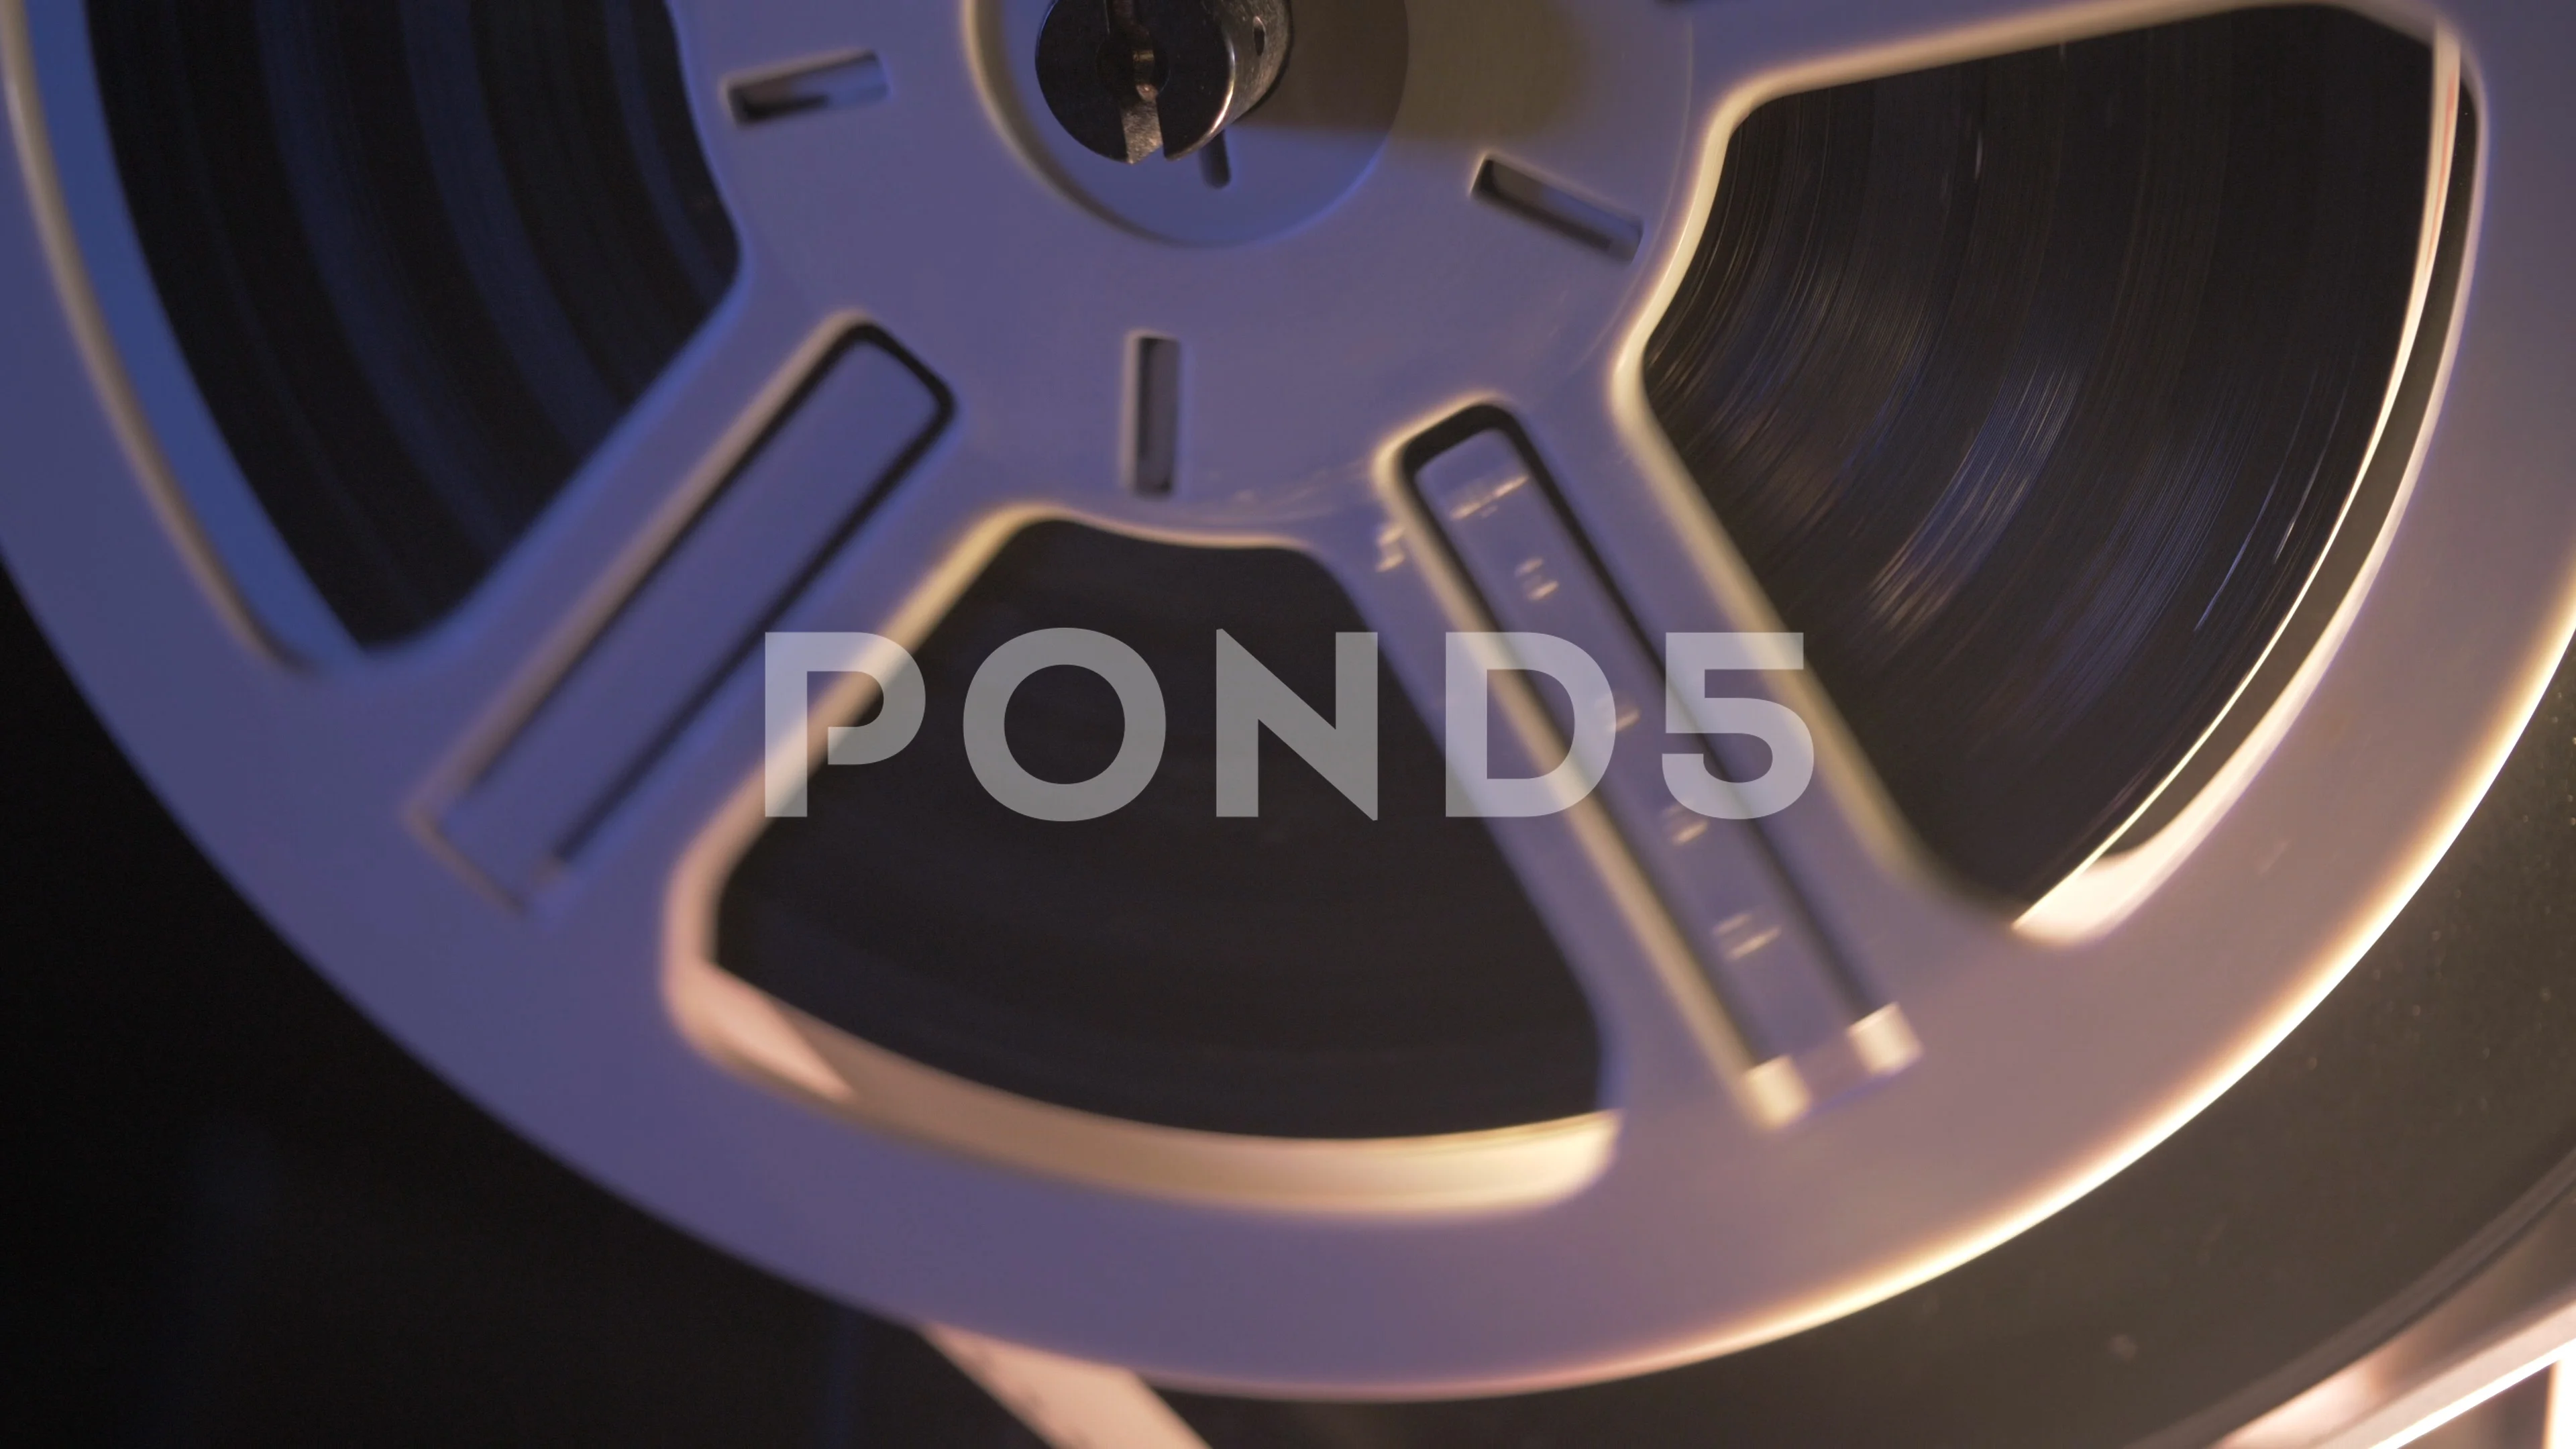 Movie Reel Ending End of Projection Cine, Stock Video